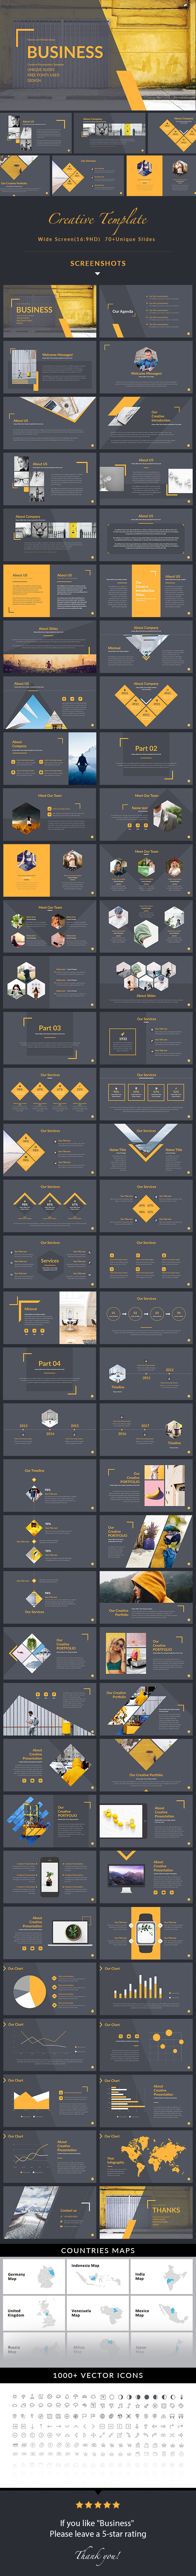 Business - Simple Multipurpose Powerpoint Template